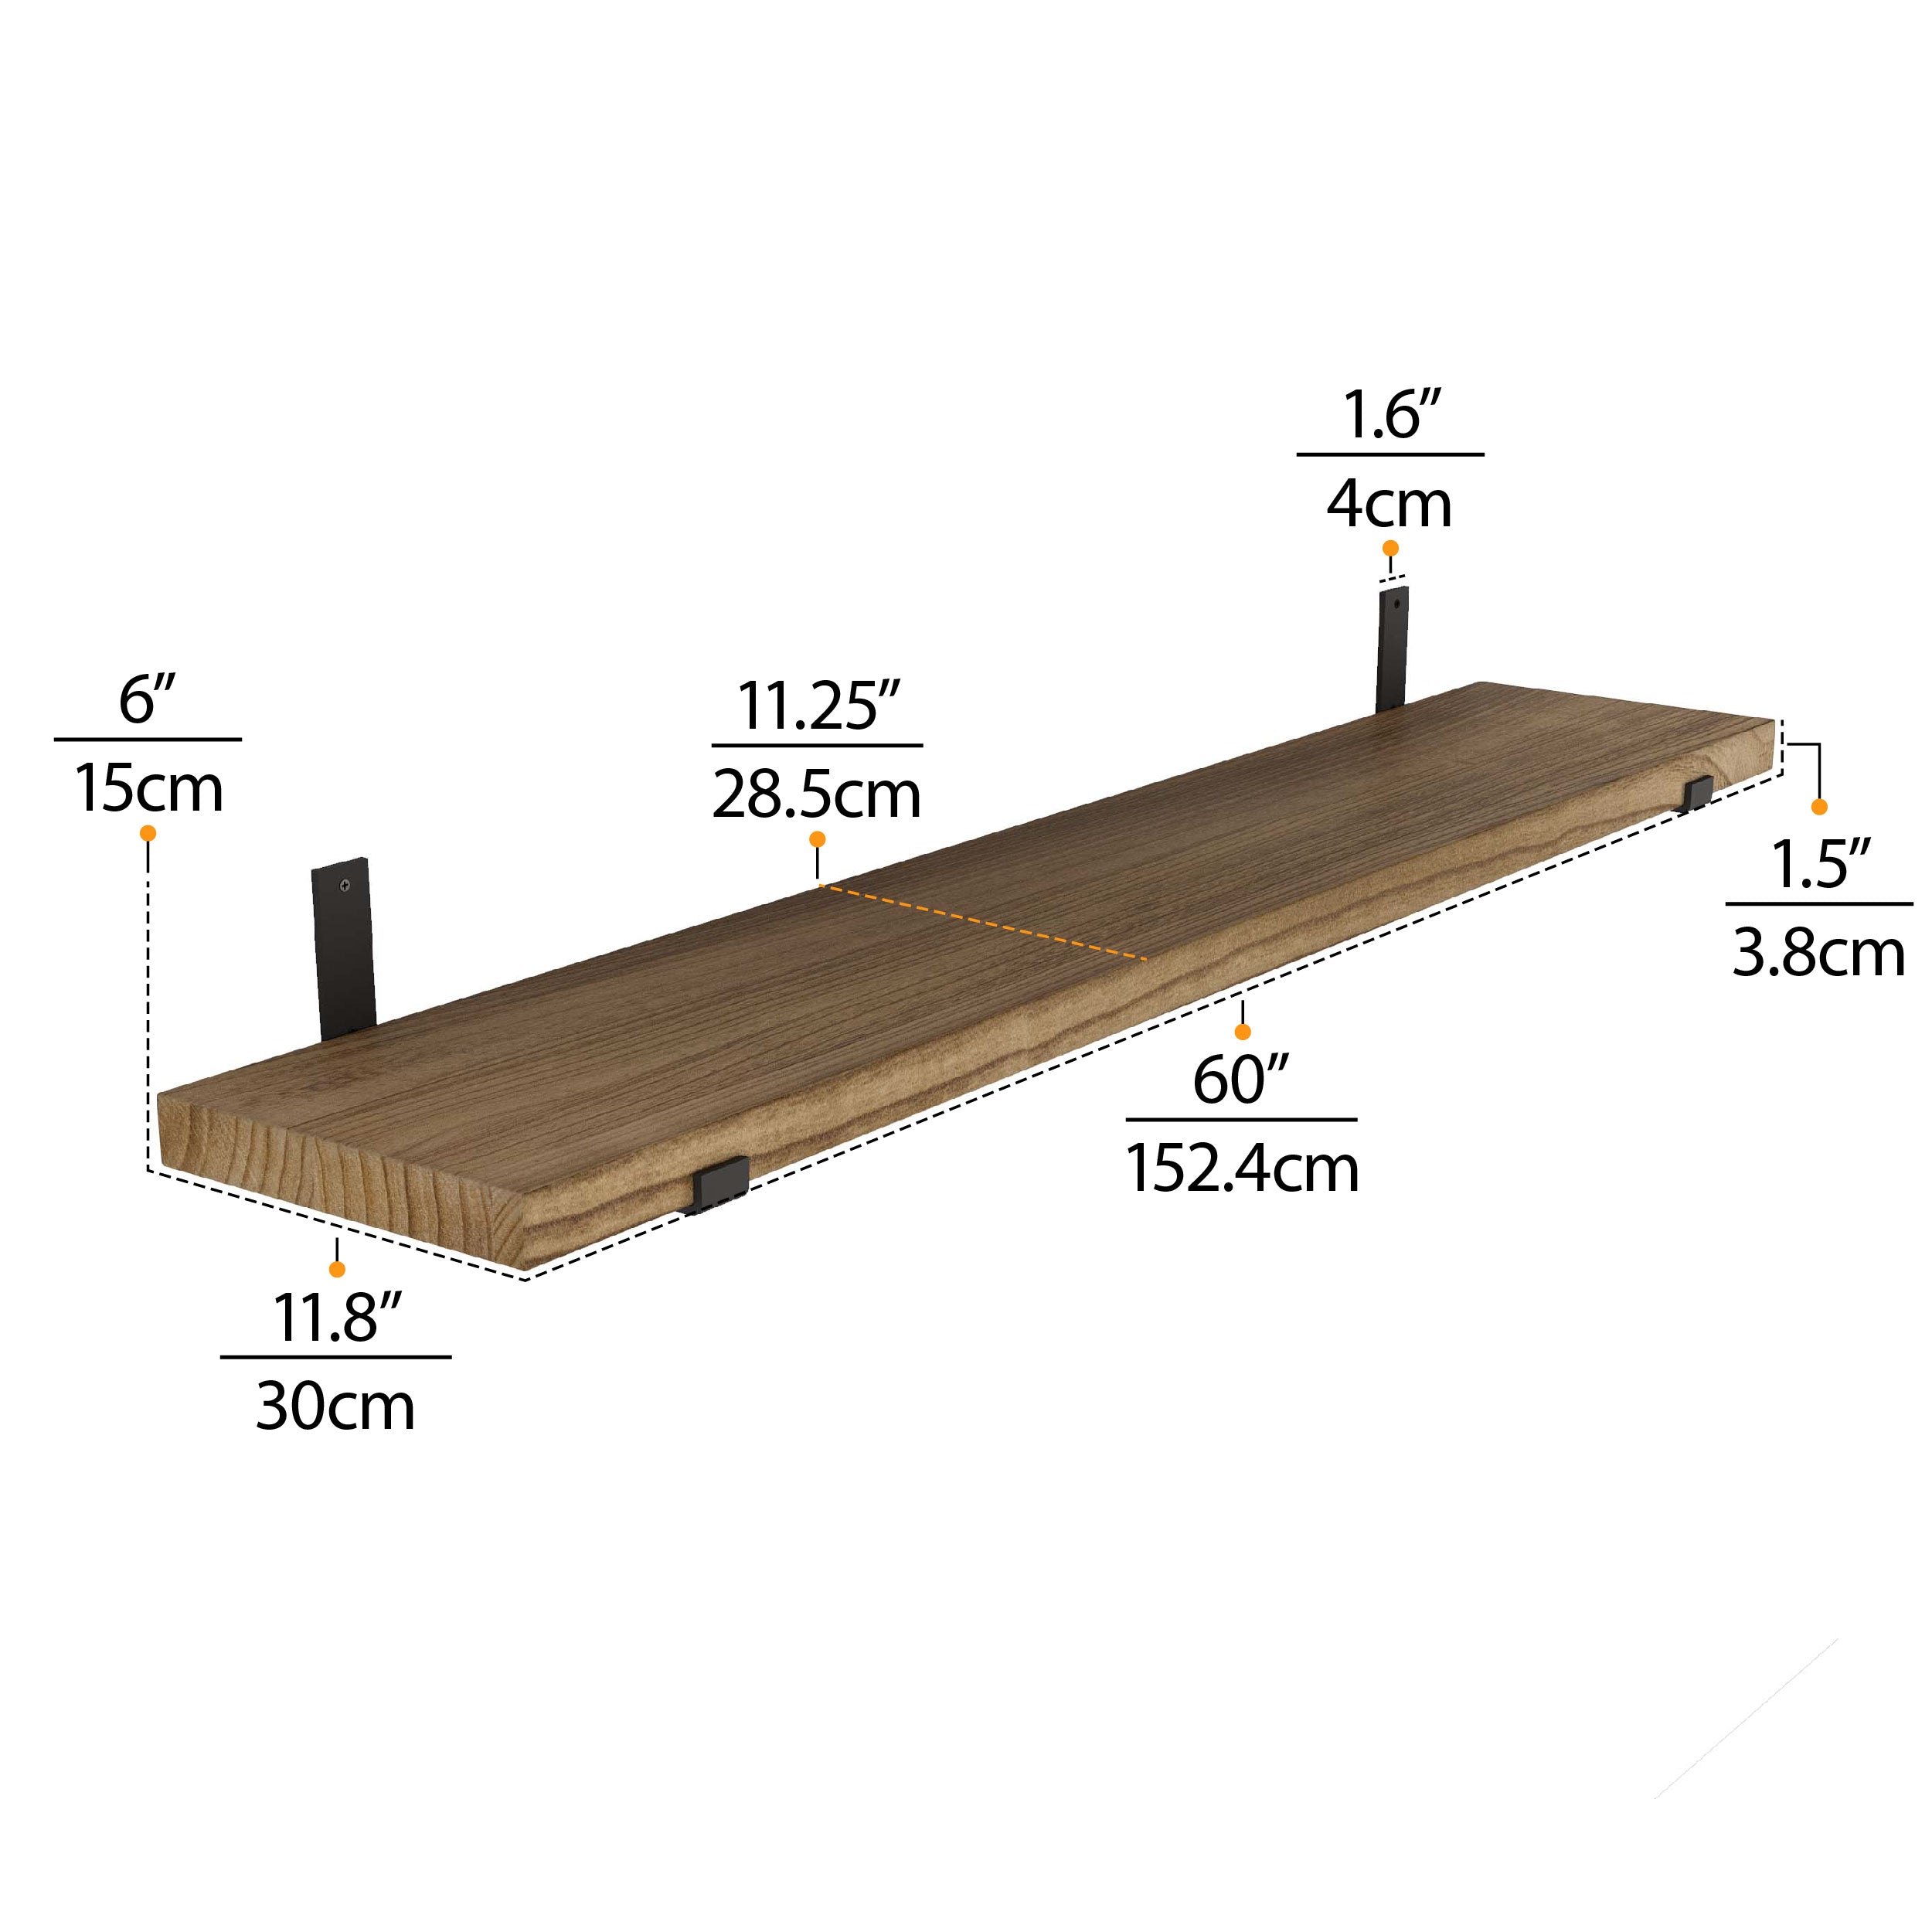 Dimensions of a 60'' burnt wooden shelf with mounting bracket placement.